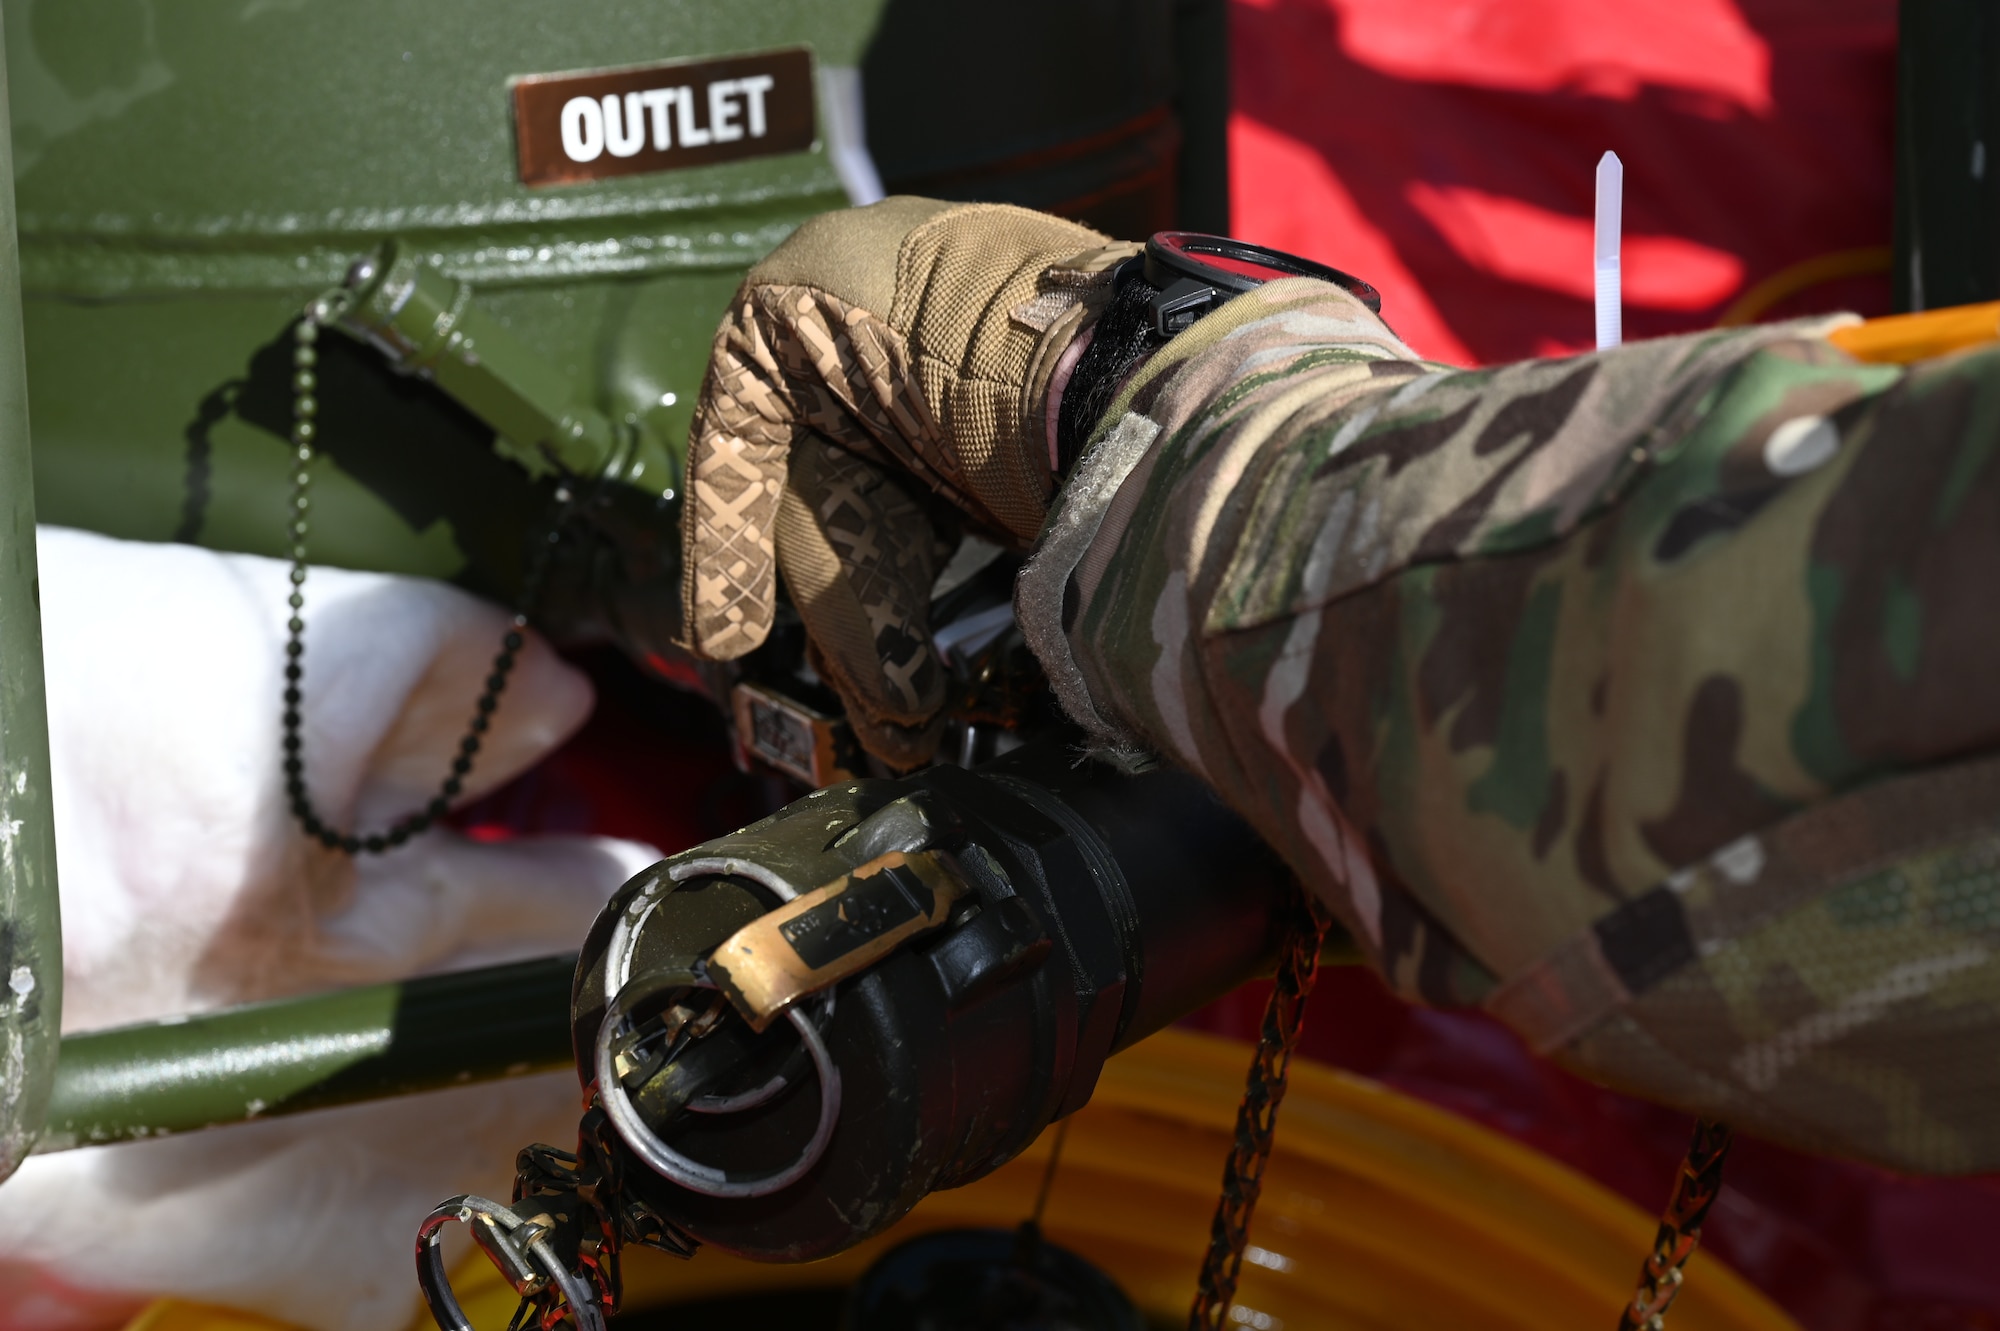 An Airman pulls a fuel sample while using gloves.